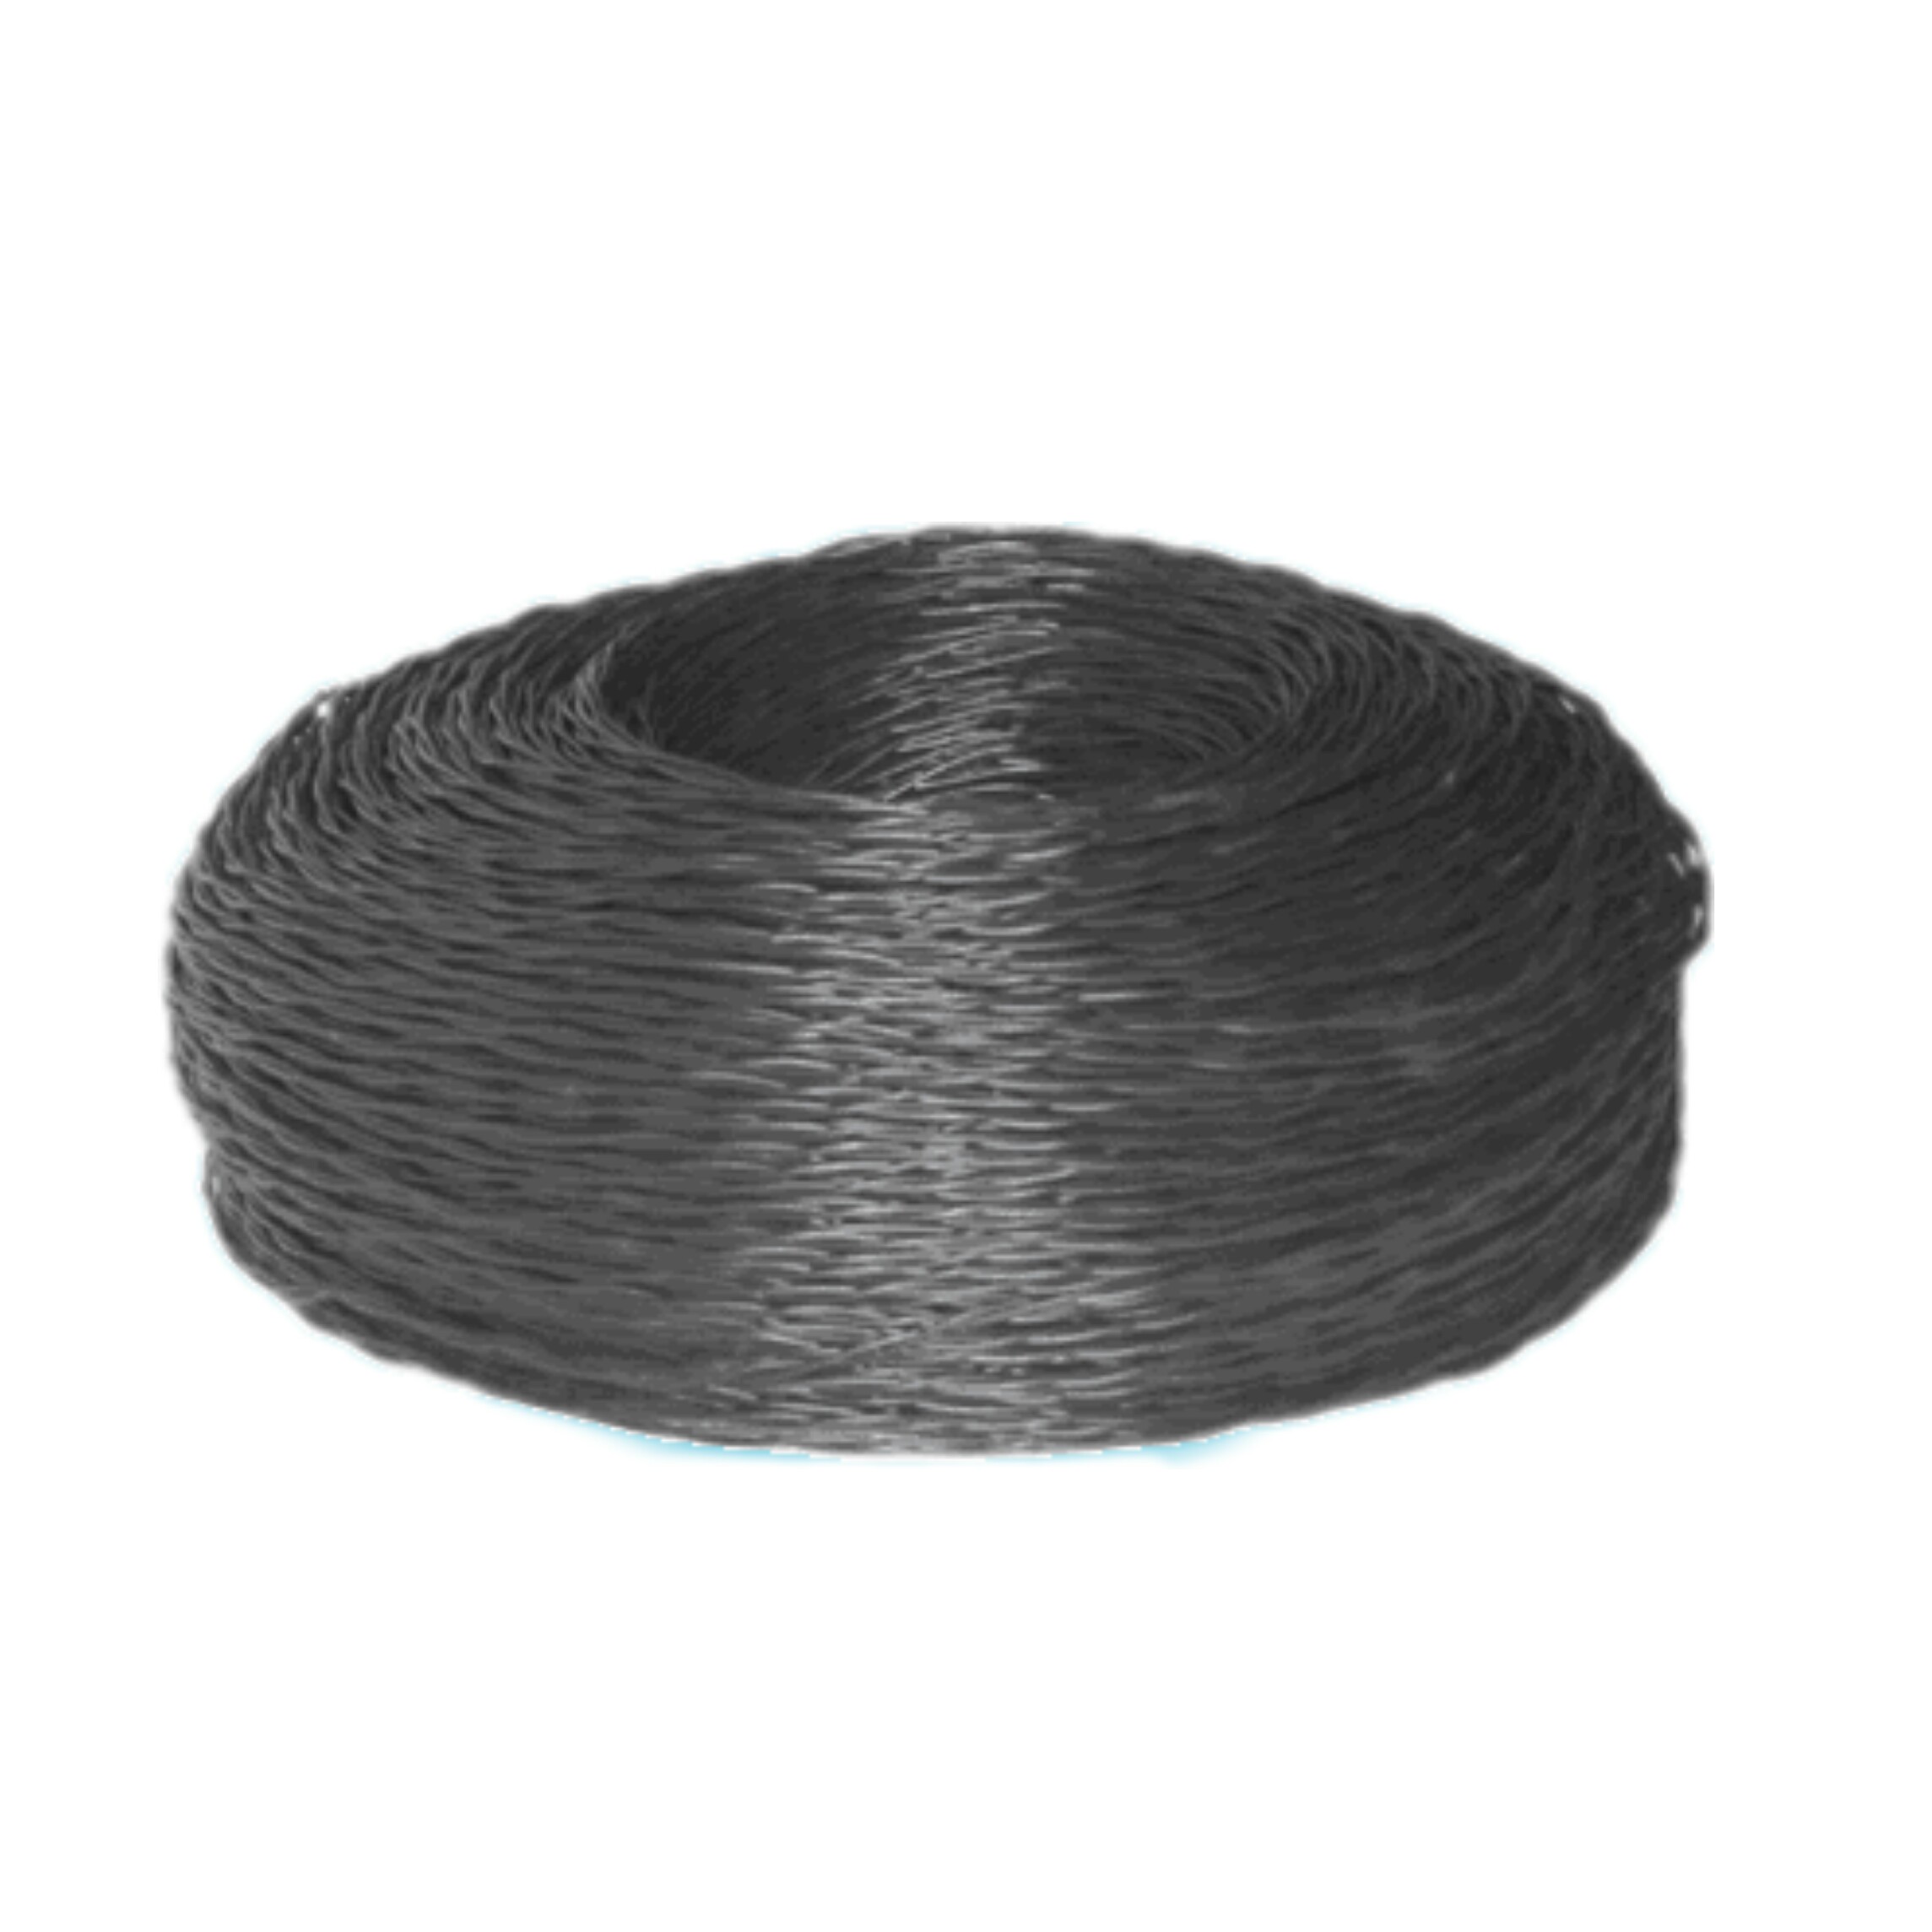 images/WDDS2/Accessories/Twisted Pair Wire1.jpg